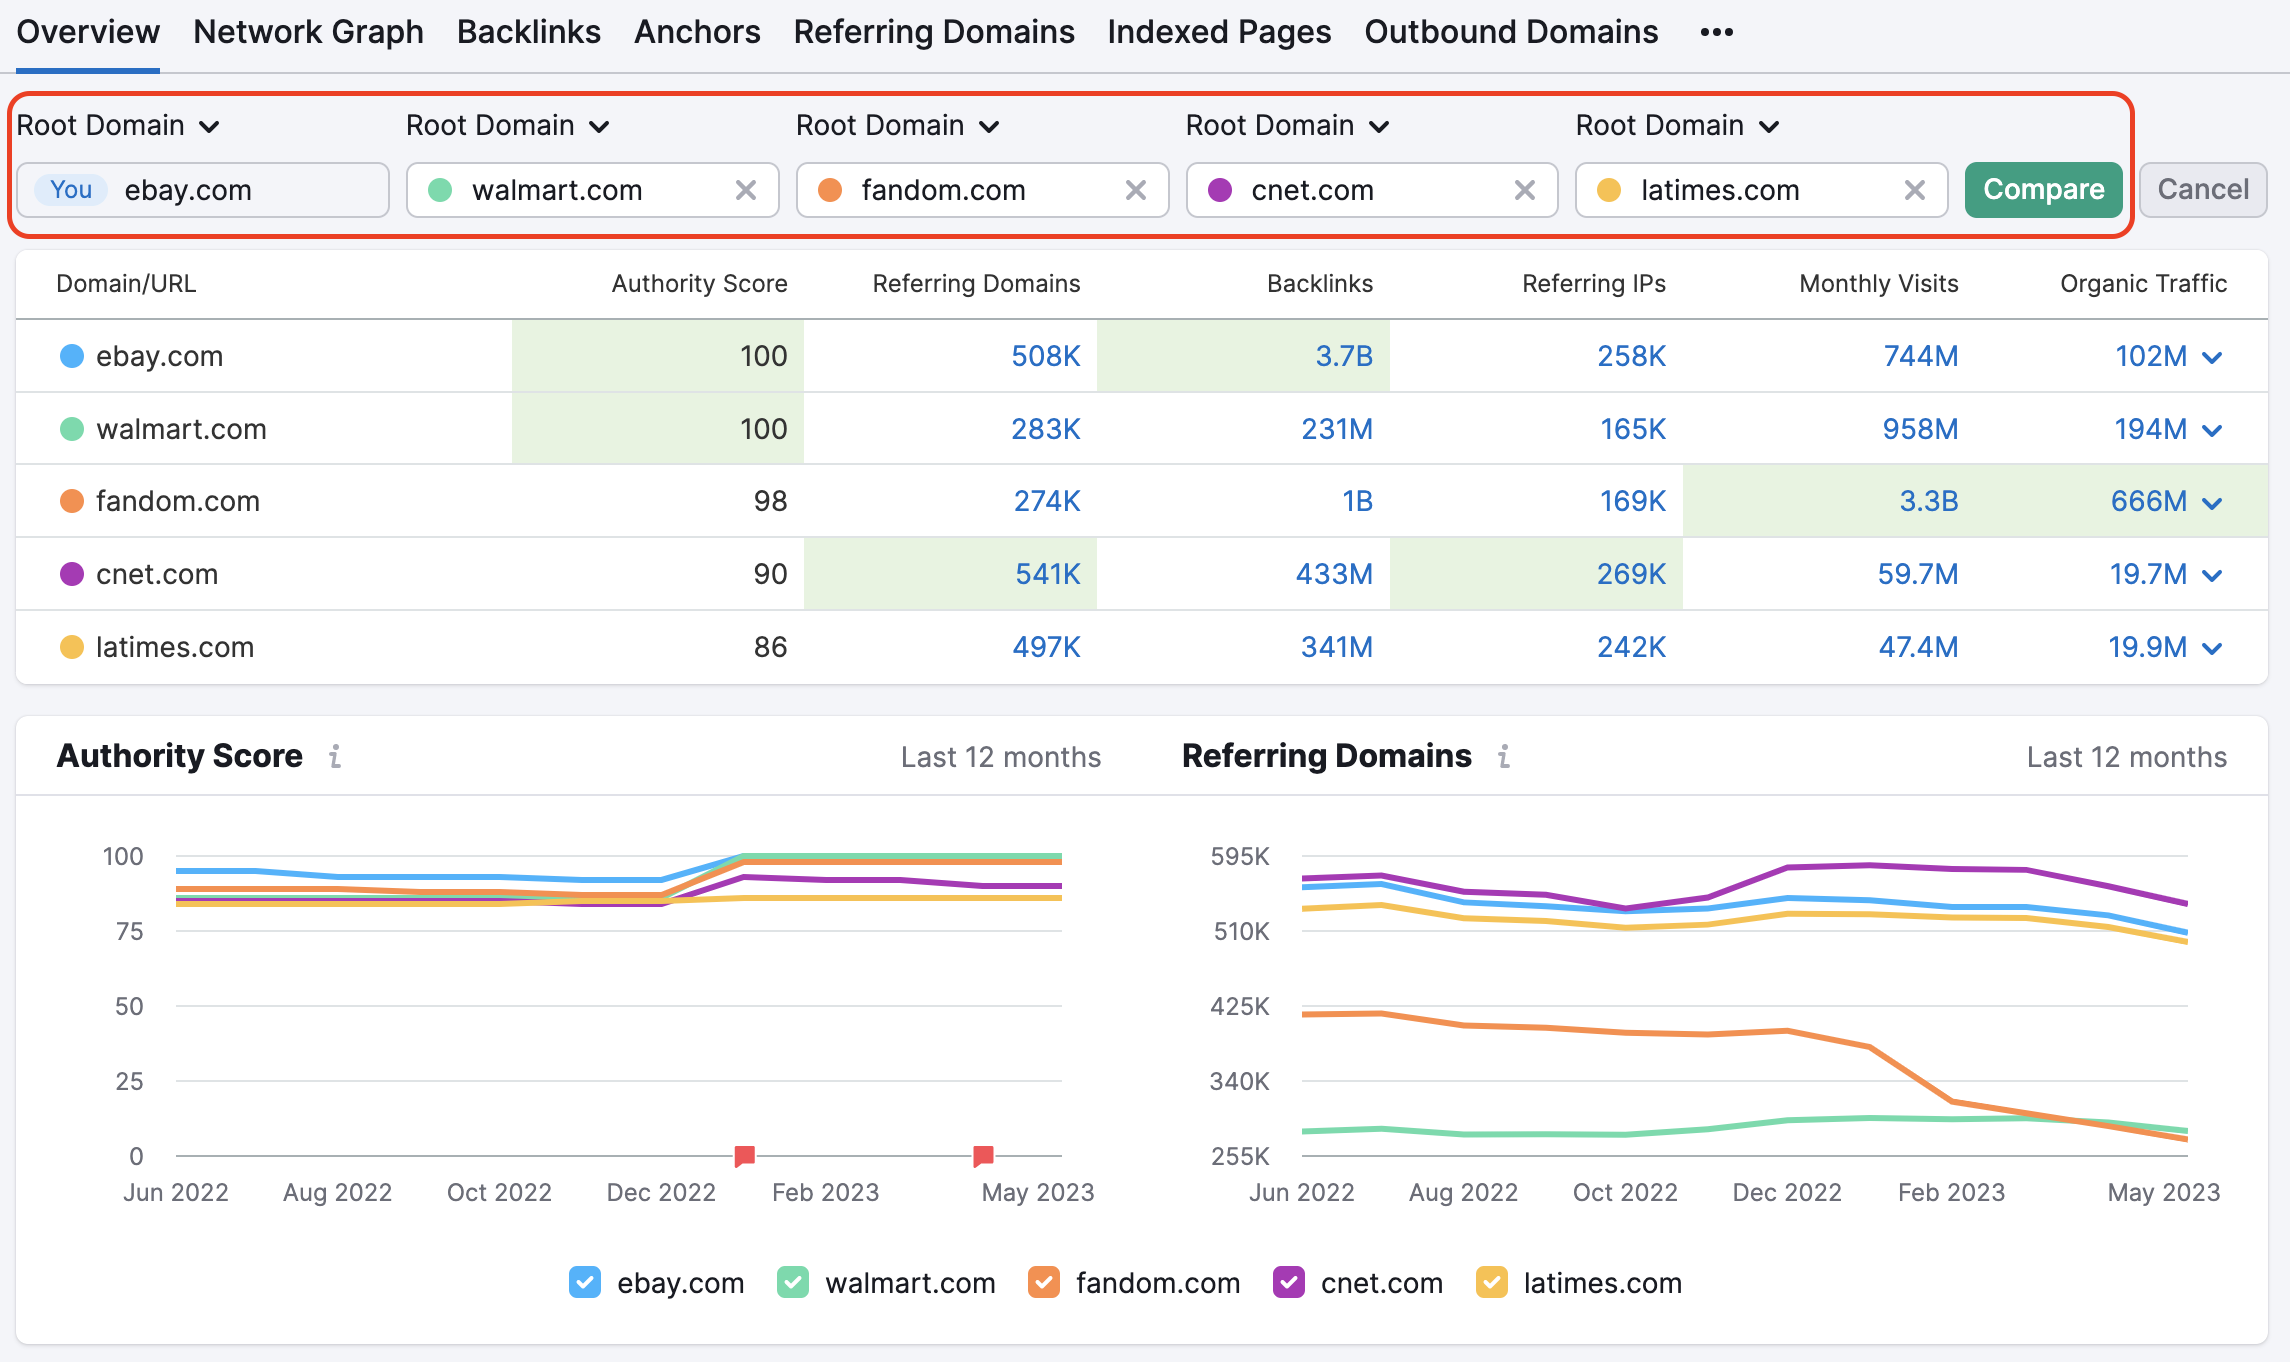 Backlink Analytics Overview report - compare domains mode 